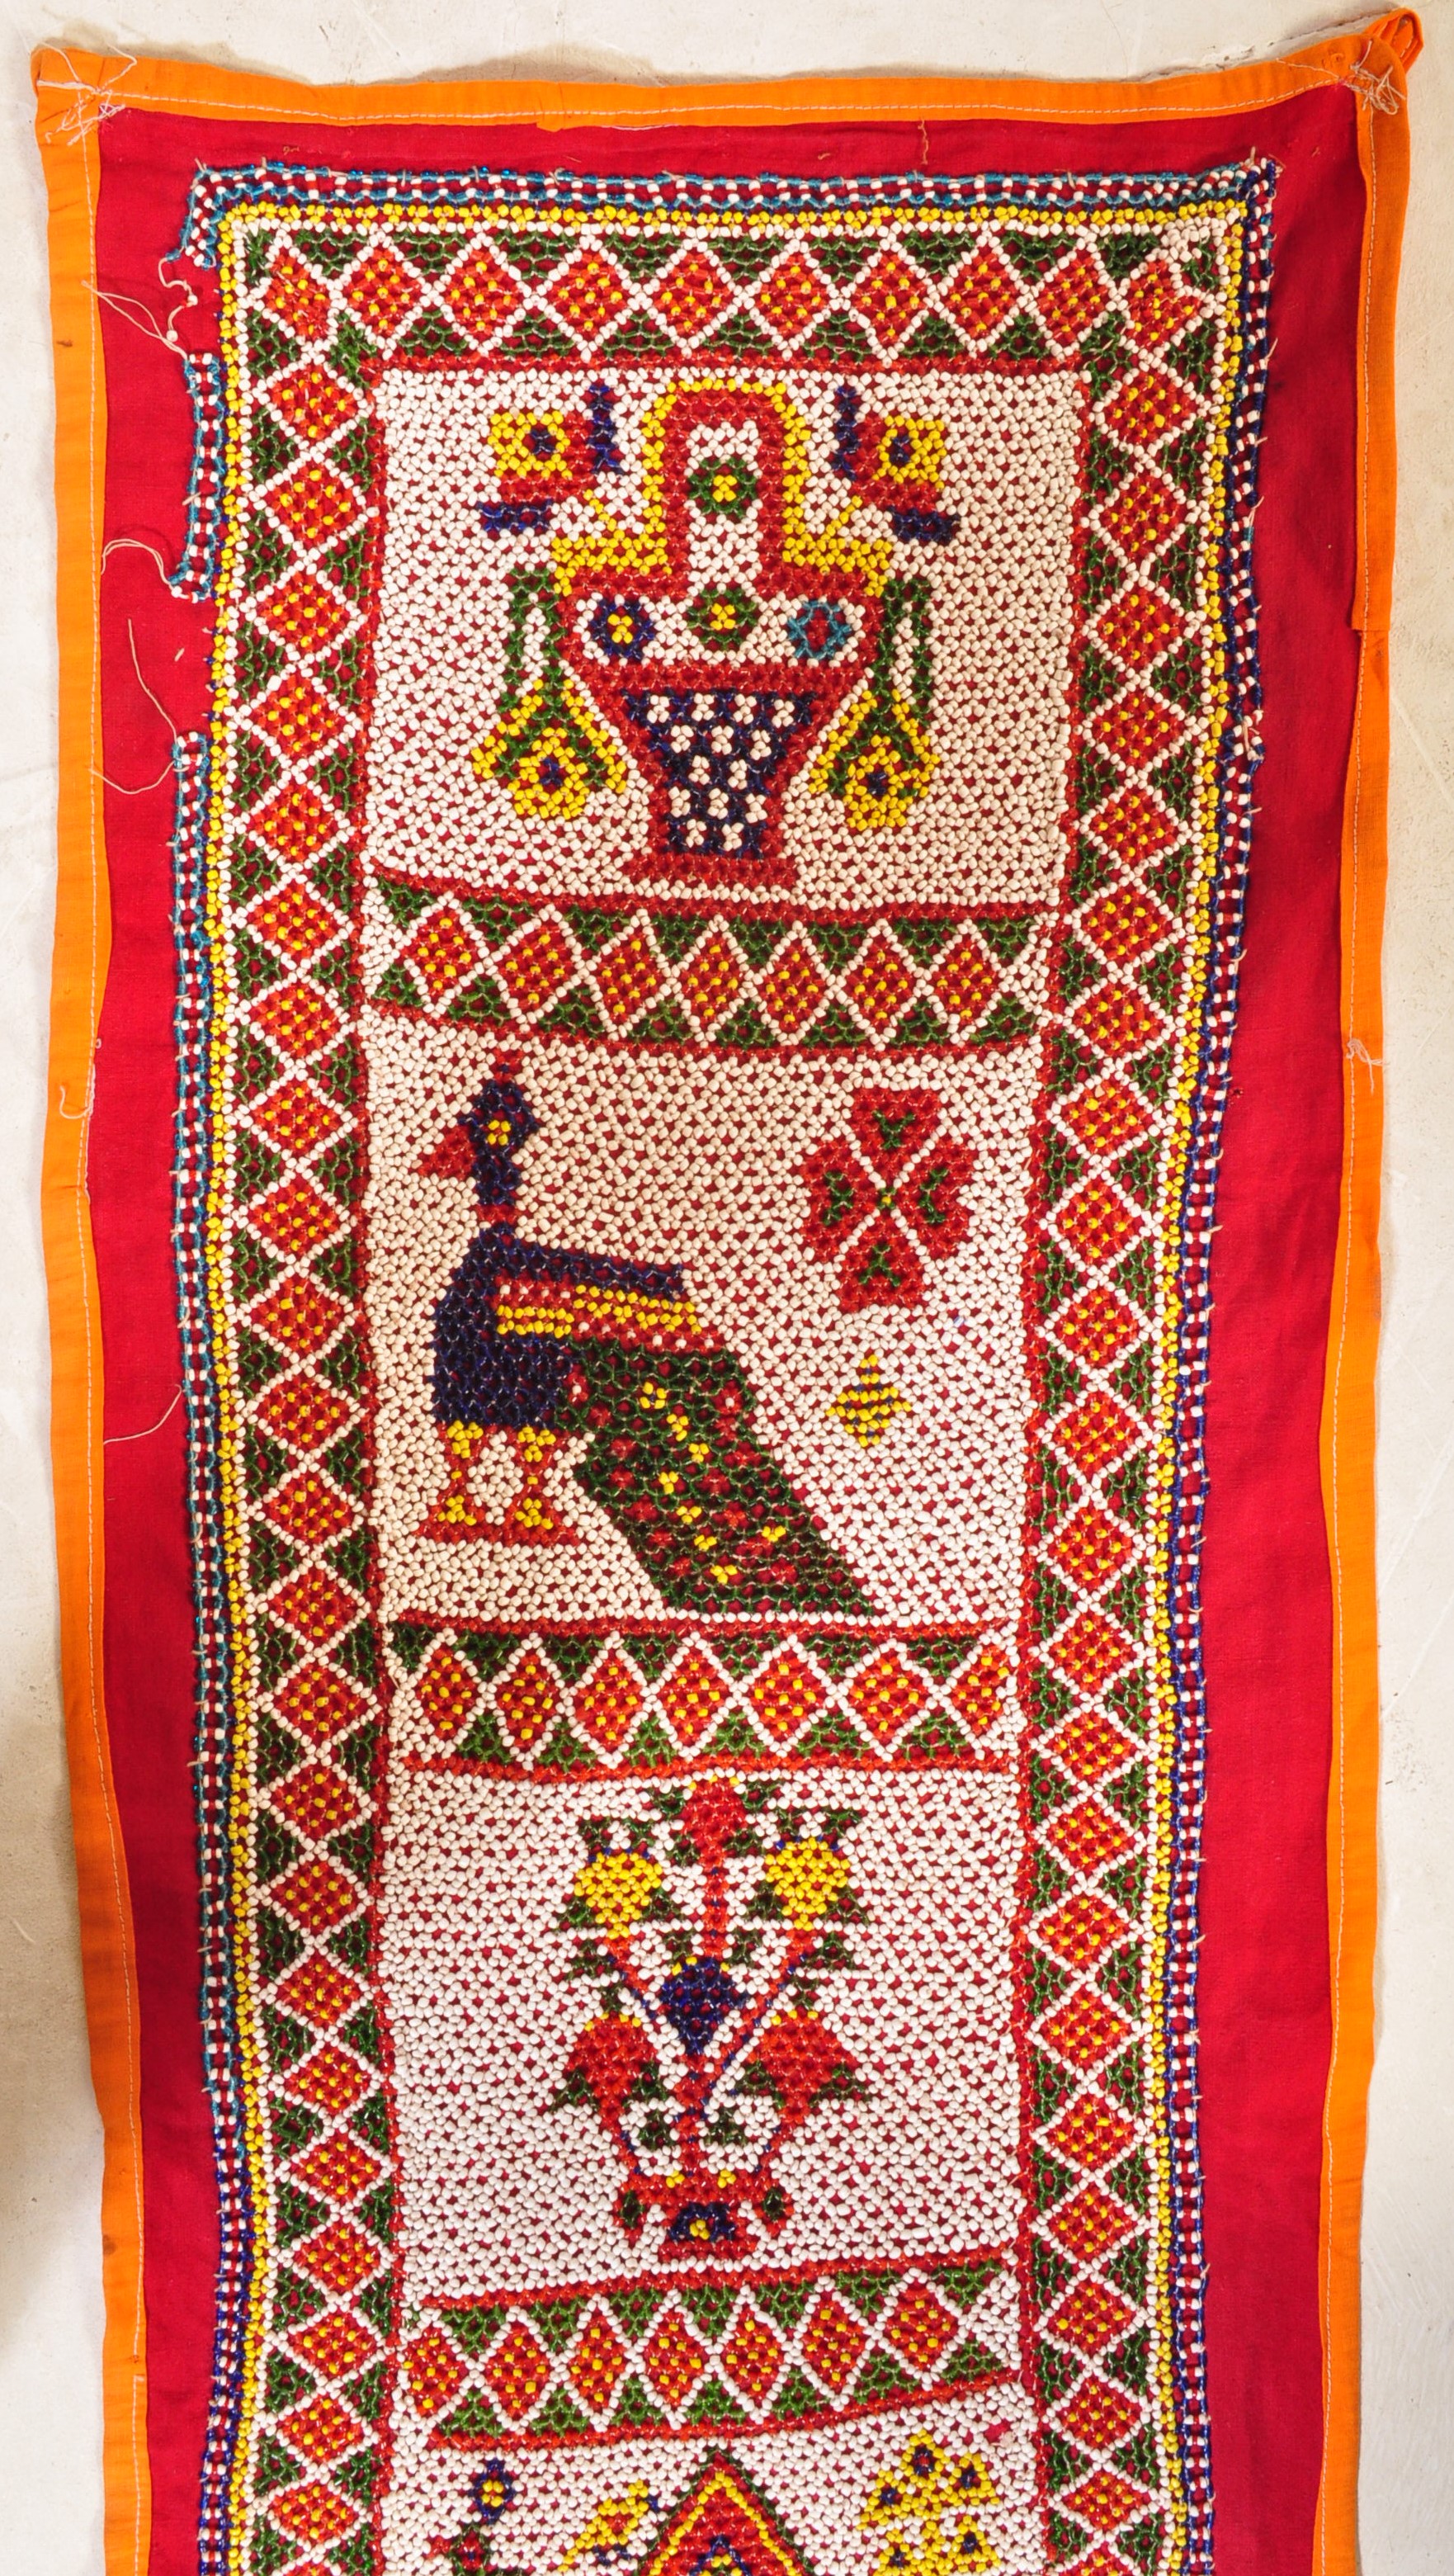 HAND MADE INDIAN BEADWORK WALL HANGING - Image 3 of 6